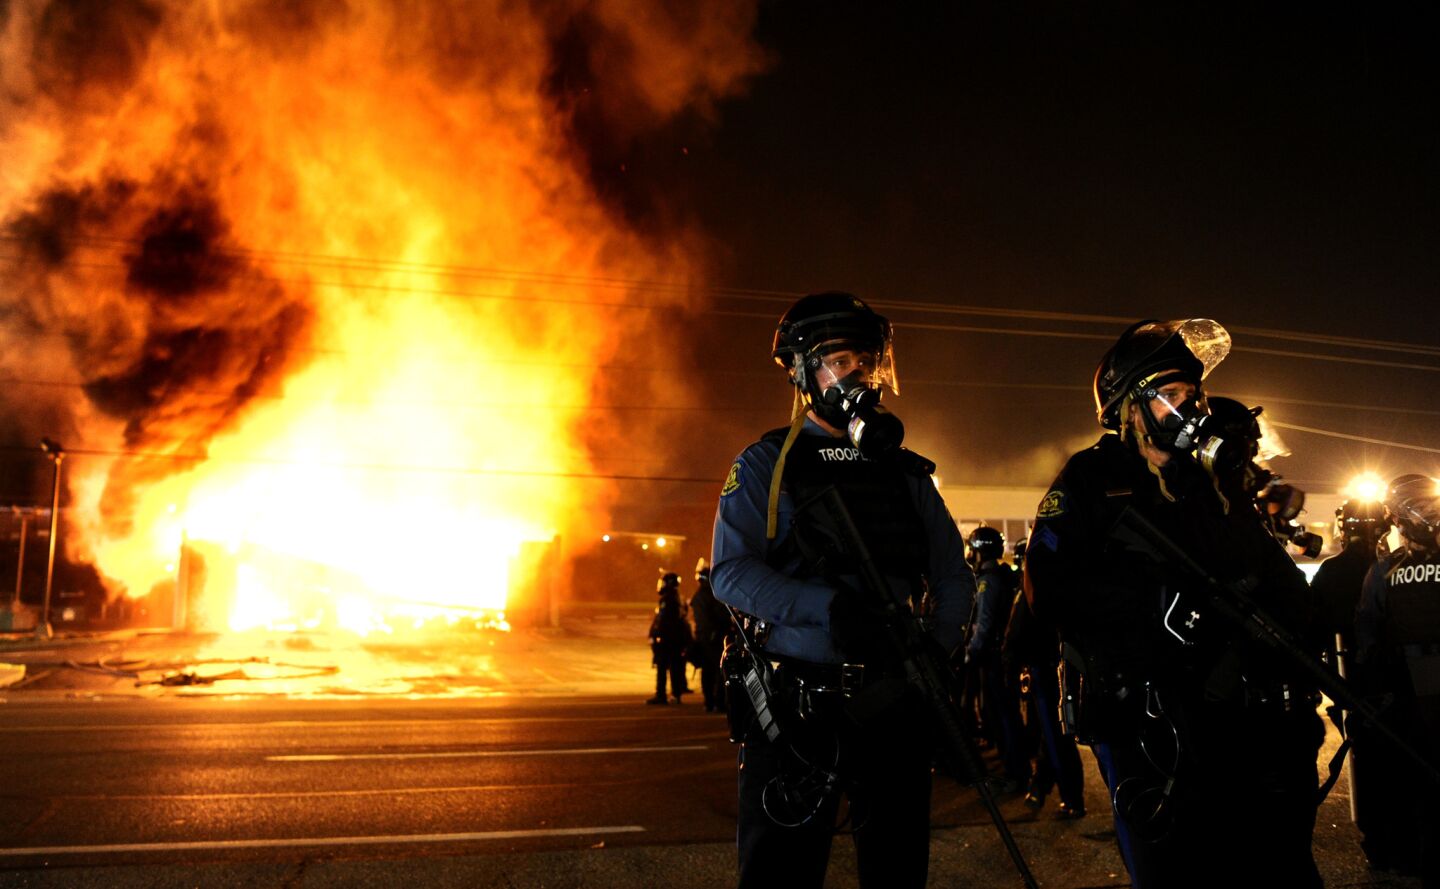 Police officers block West Florissant Avenue as a building burns in the background after a grand jury decision in Ferguson, Mo.